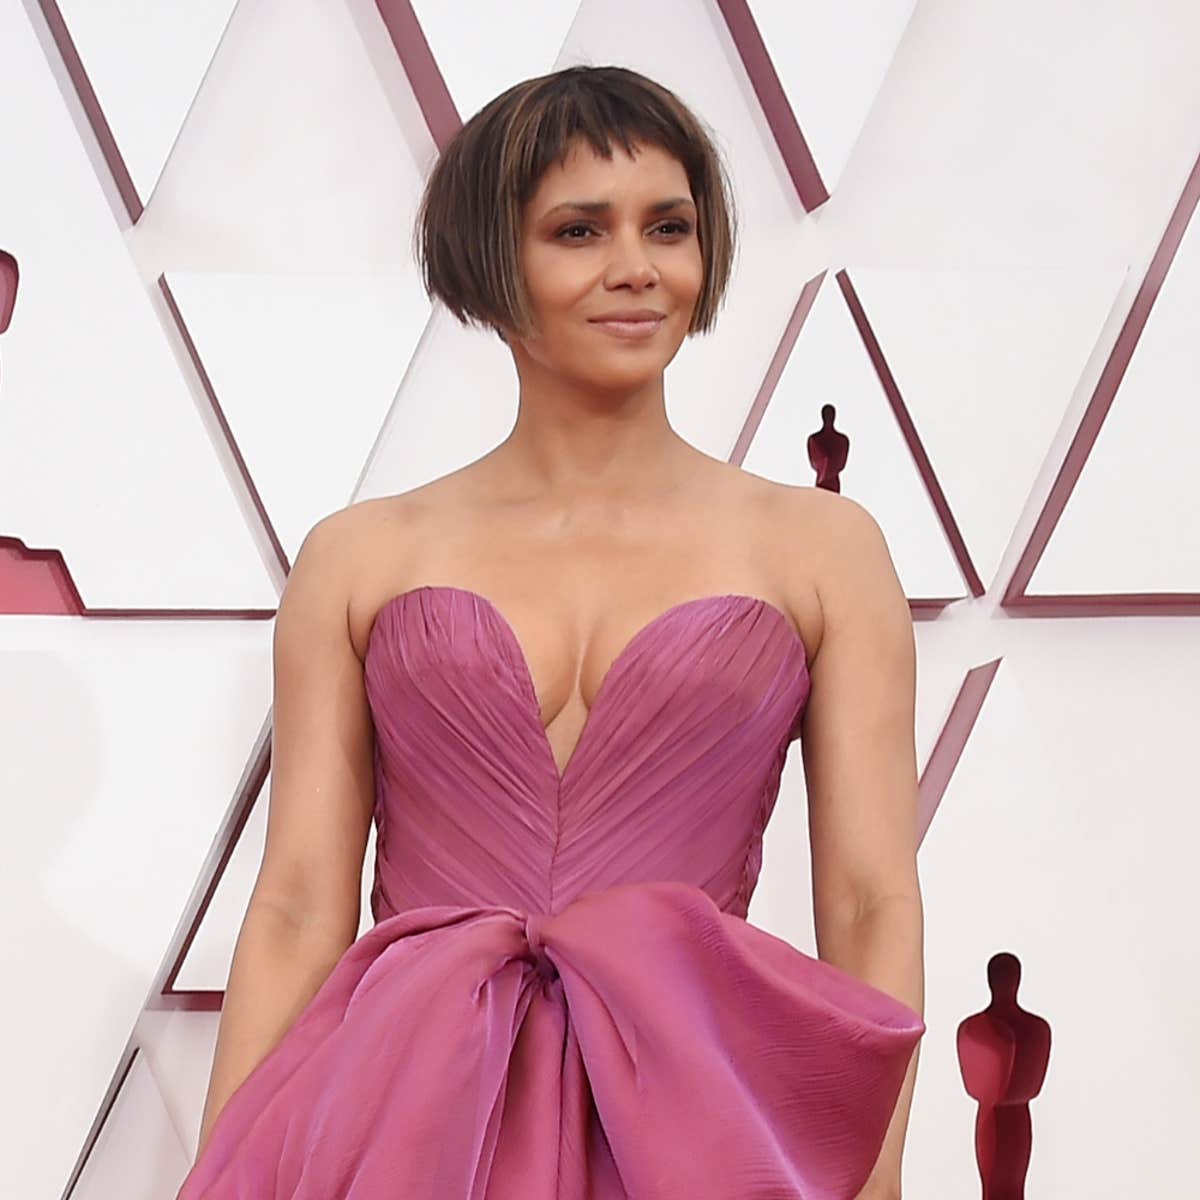 Halle Berry Wears A Short Bob With Bangs To The Oscars